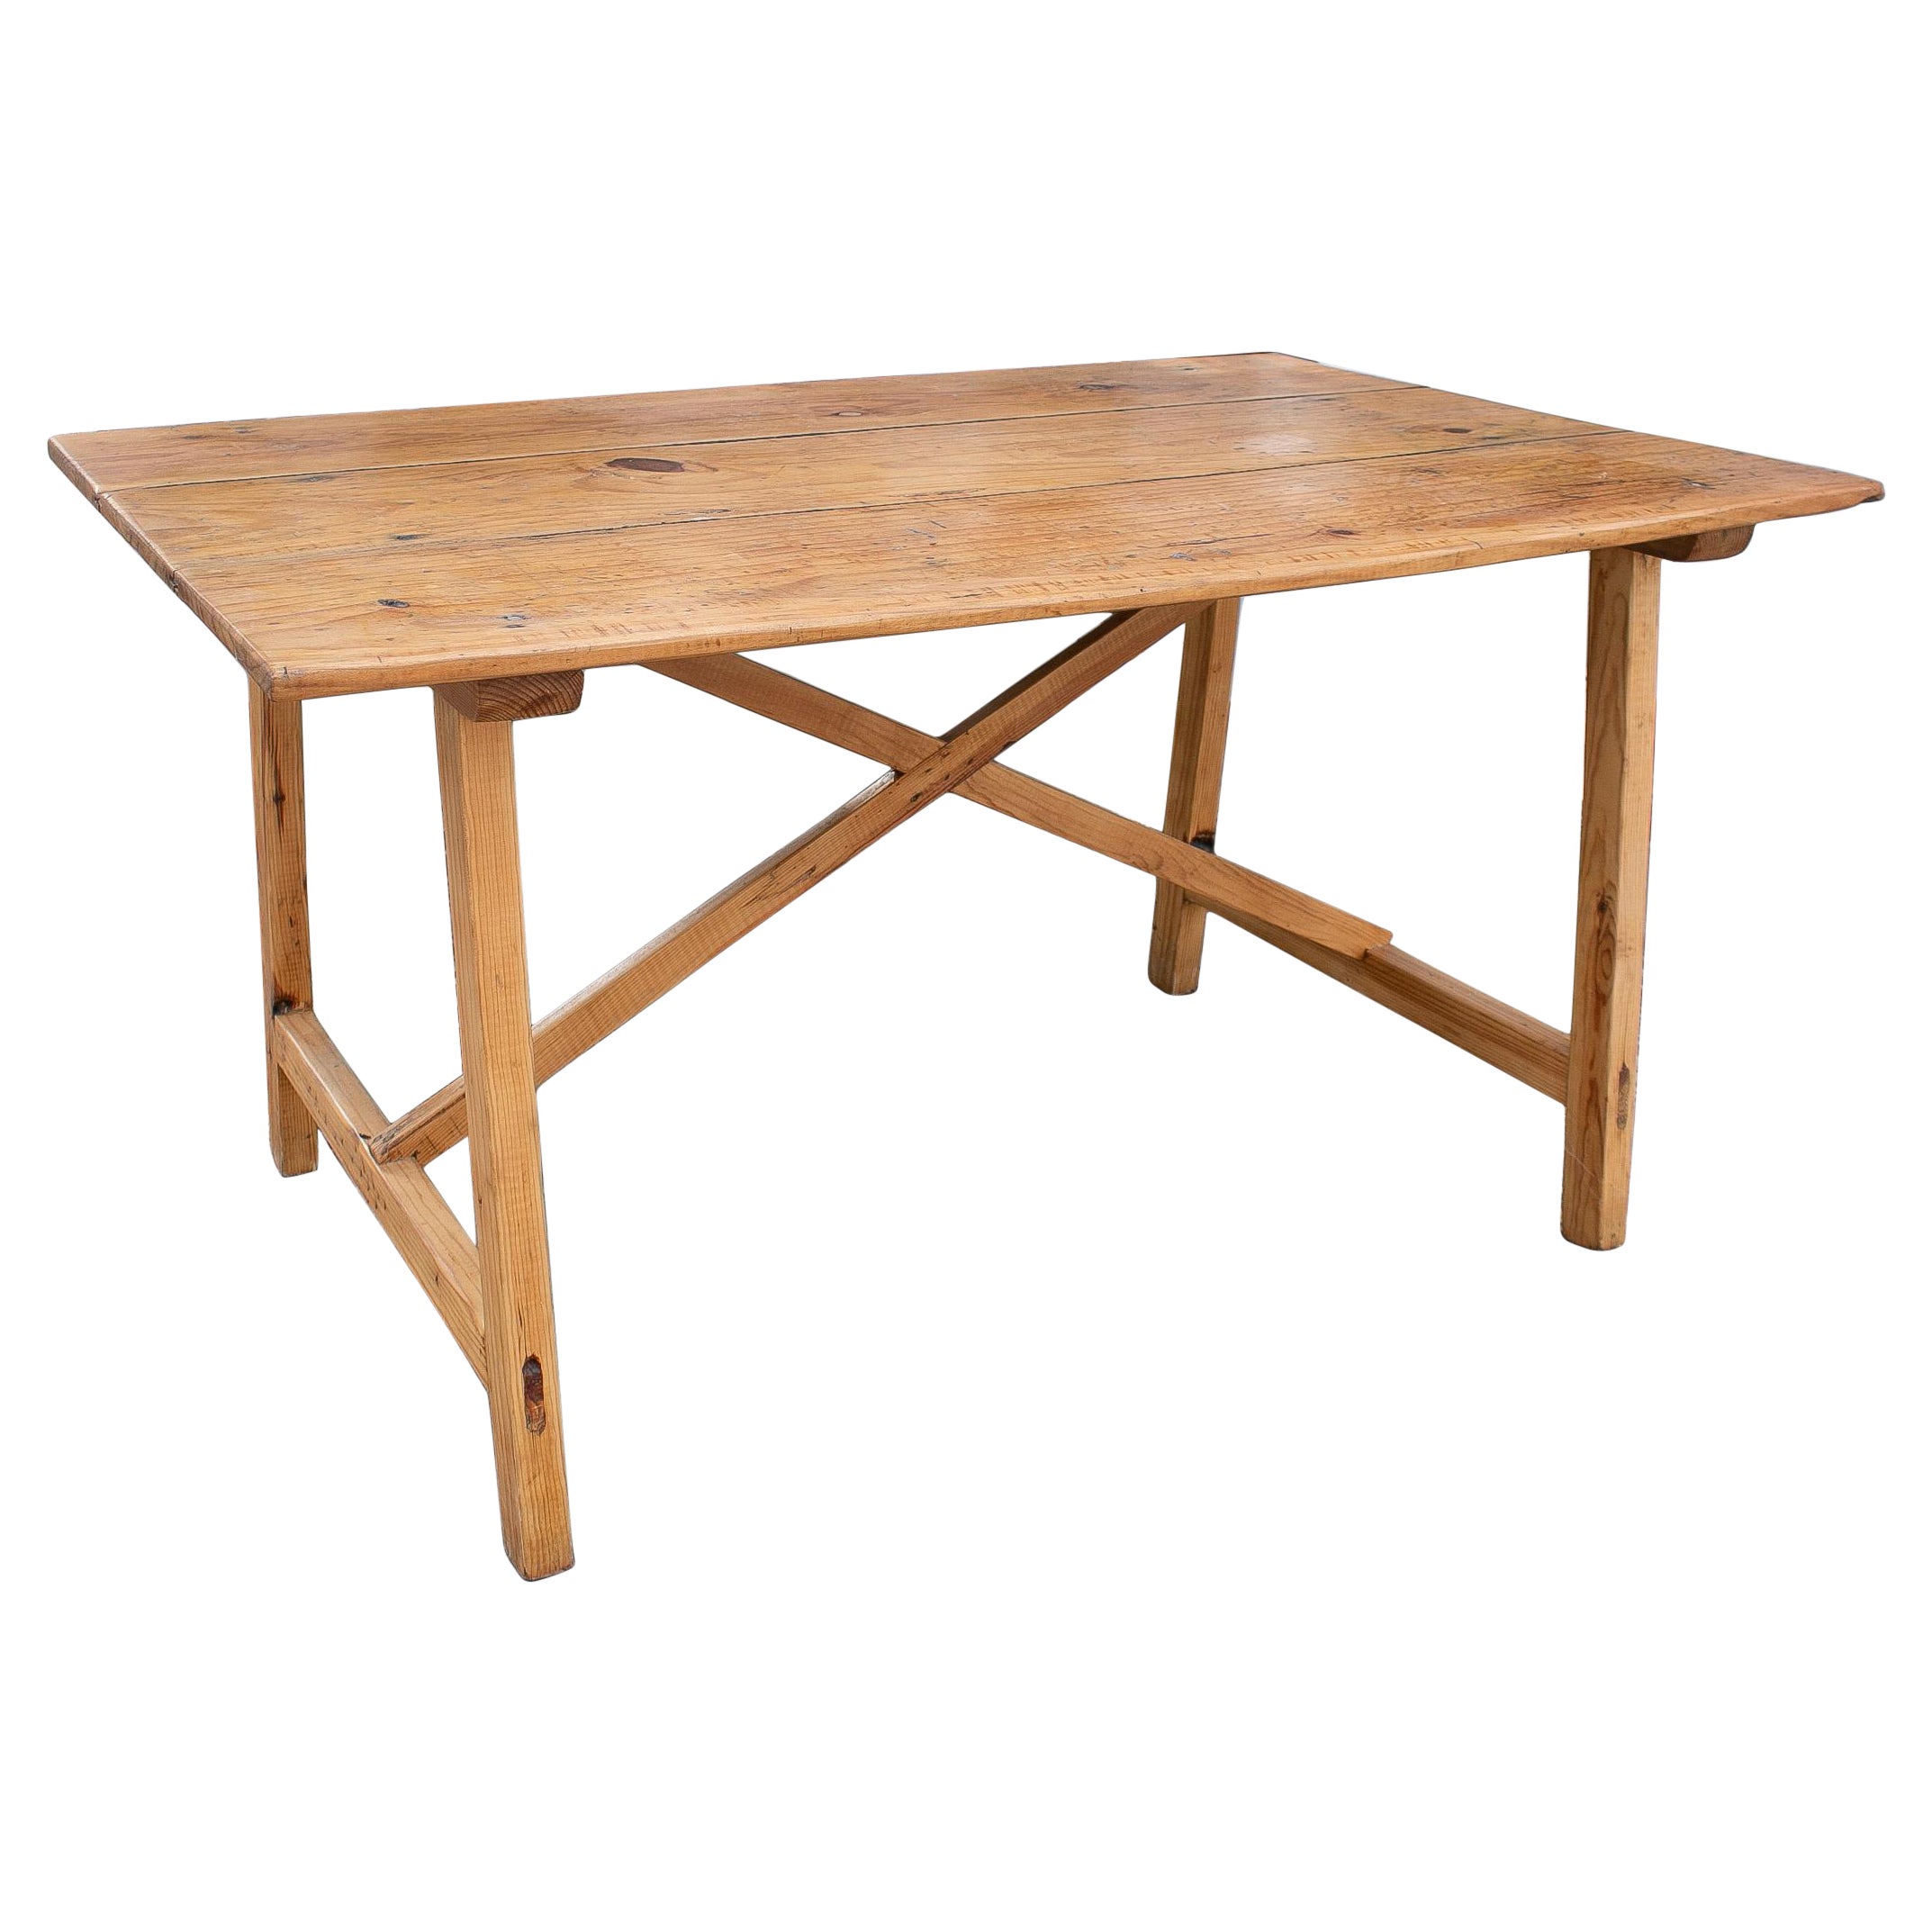 Simple Spanish Country Table in Pine Wood